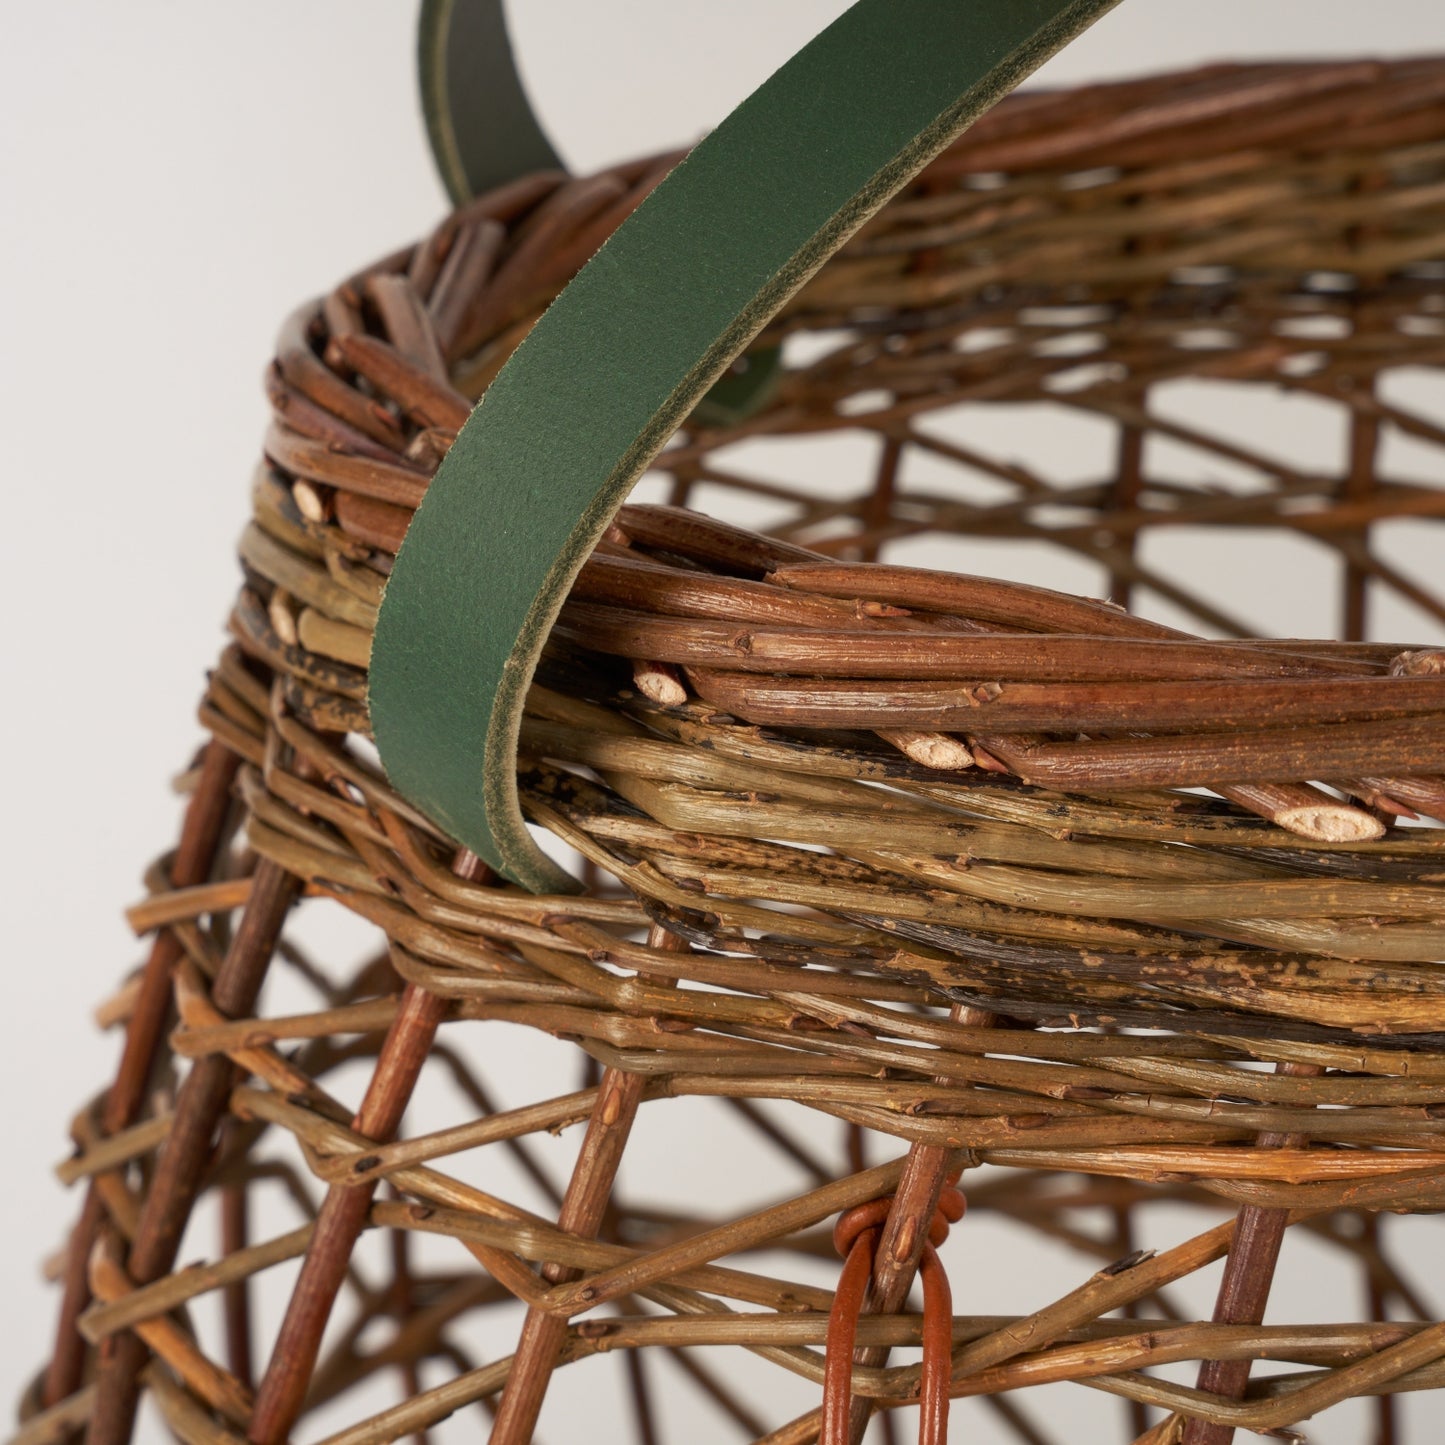 Willow Basket with Olive Green Leather Straps